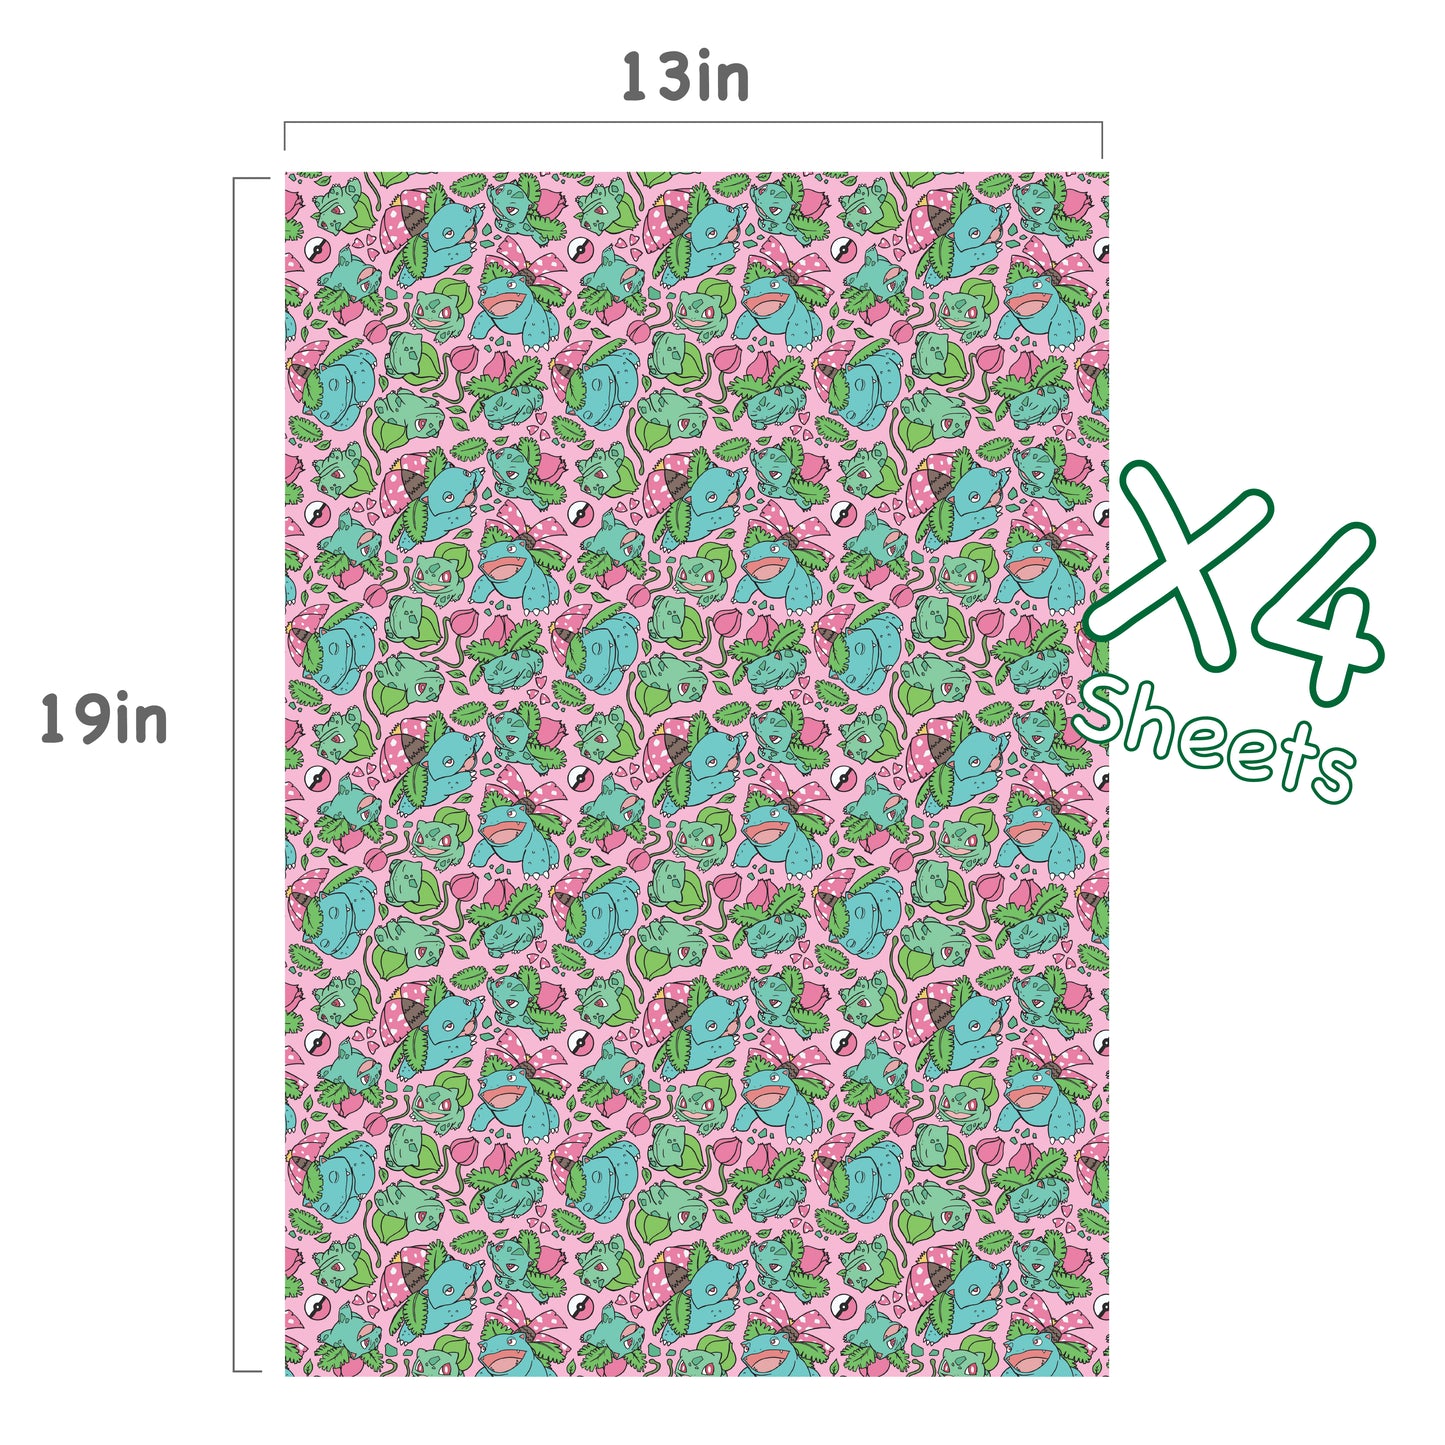 Bulbasaur Evolution Wrapping Paper Sheets